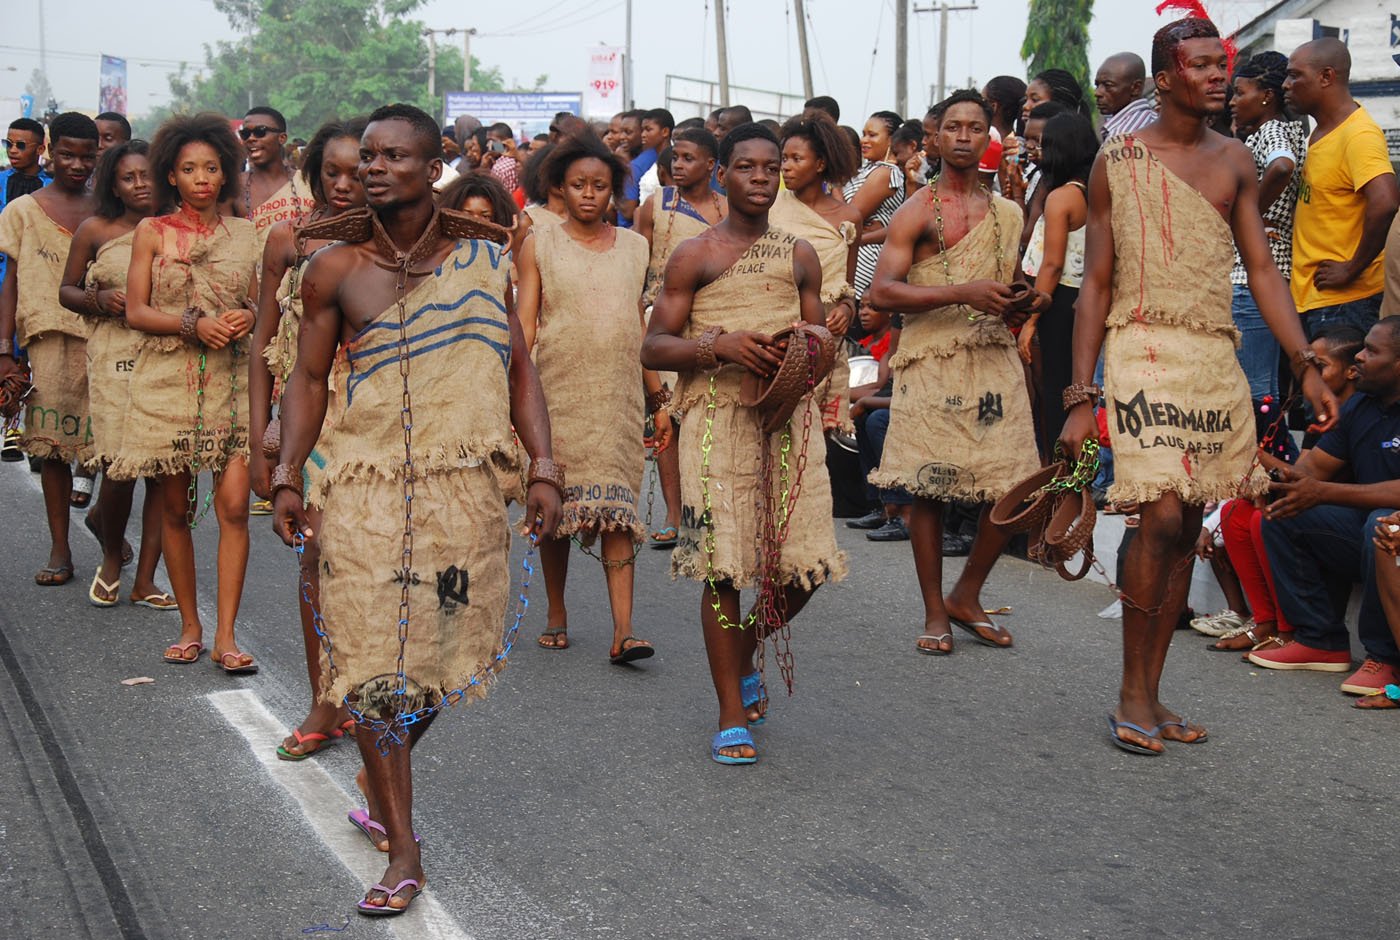 Members of Bayside Band wearing a Costume Depicting Slavery during the Main Event of the 2017 Carnival Calabar in Cross River State Yesterday. Photo: Nwankpa Chijioke